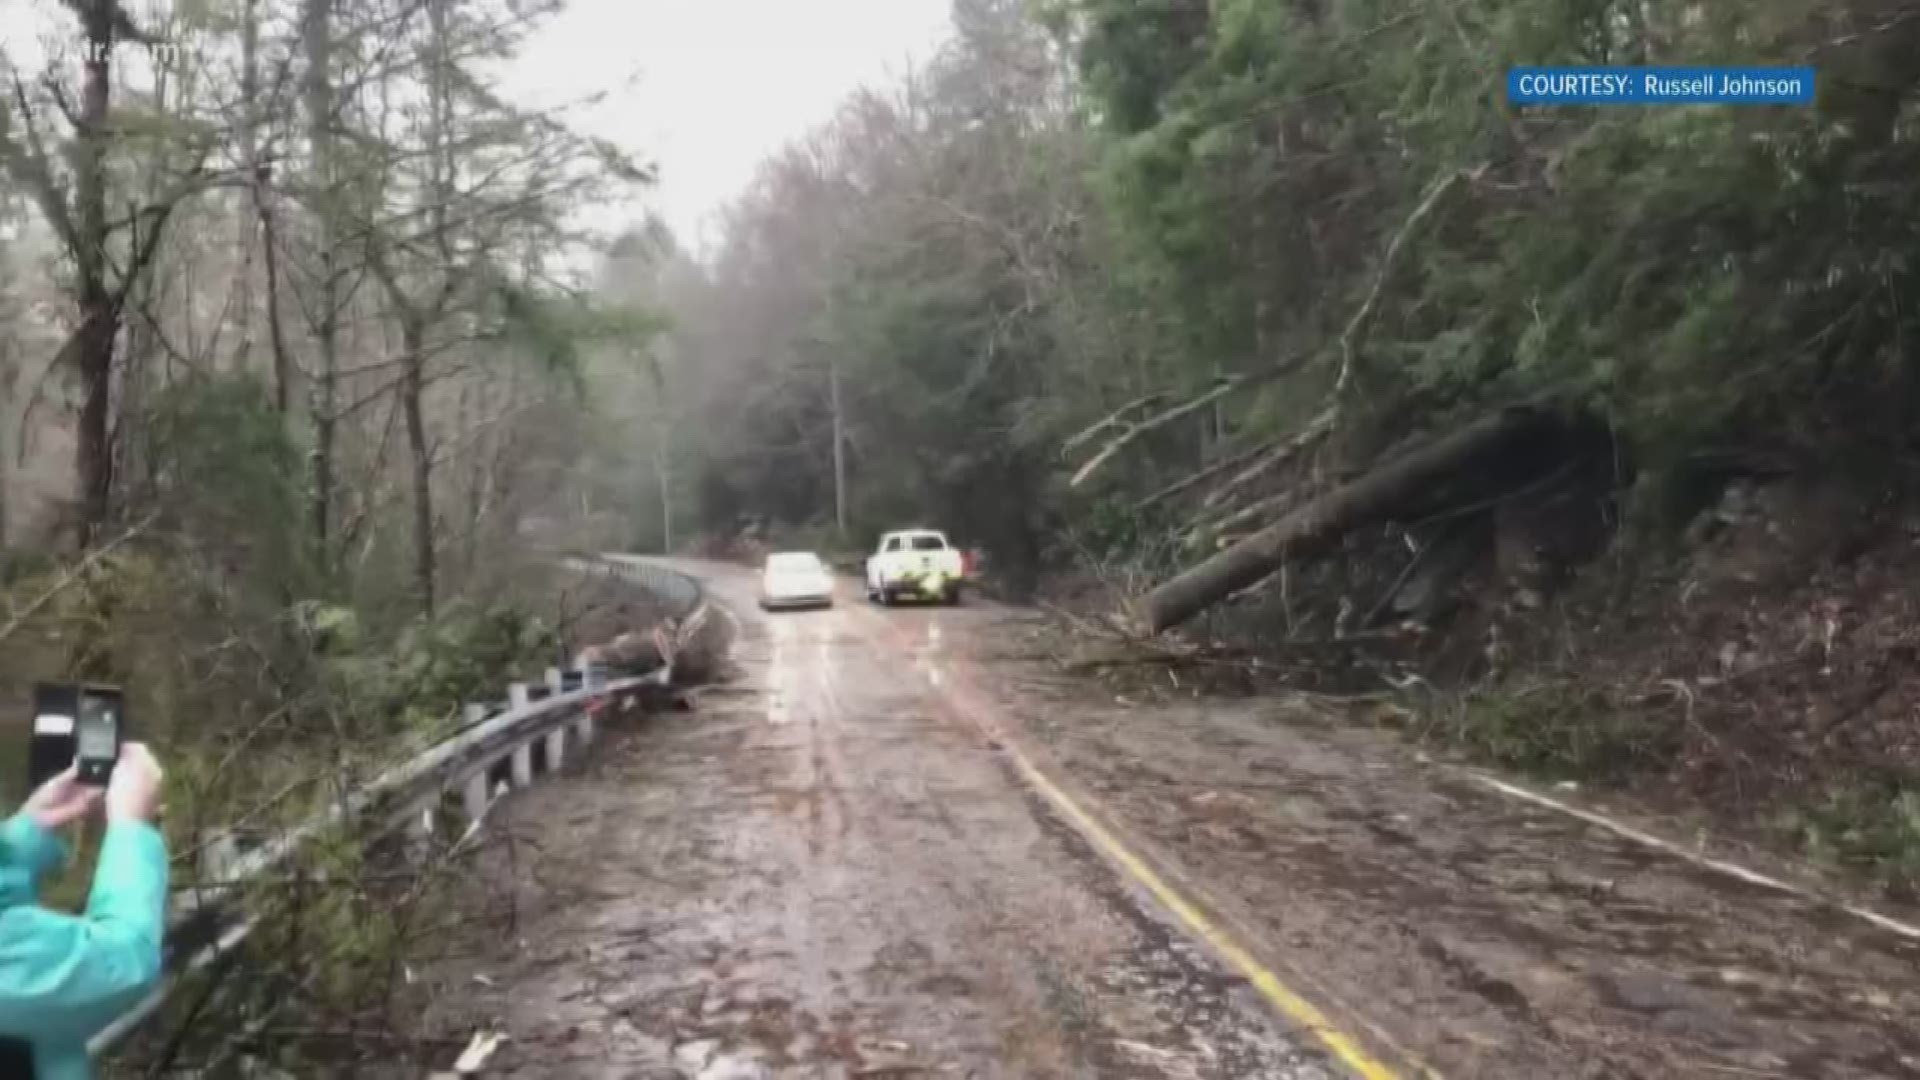 The National Weather Service confirmed an EF-0 tornado touched down in Morgan County.